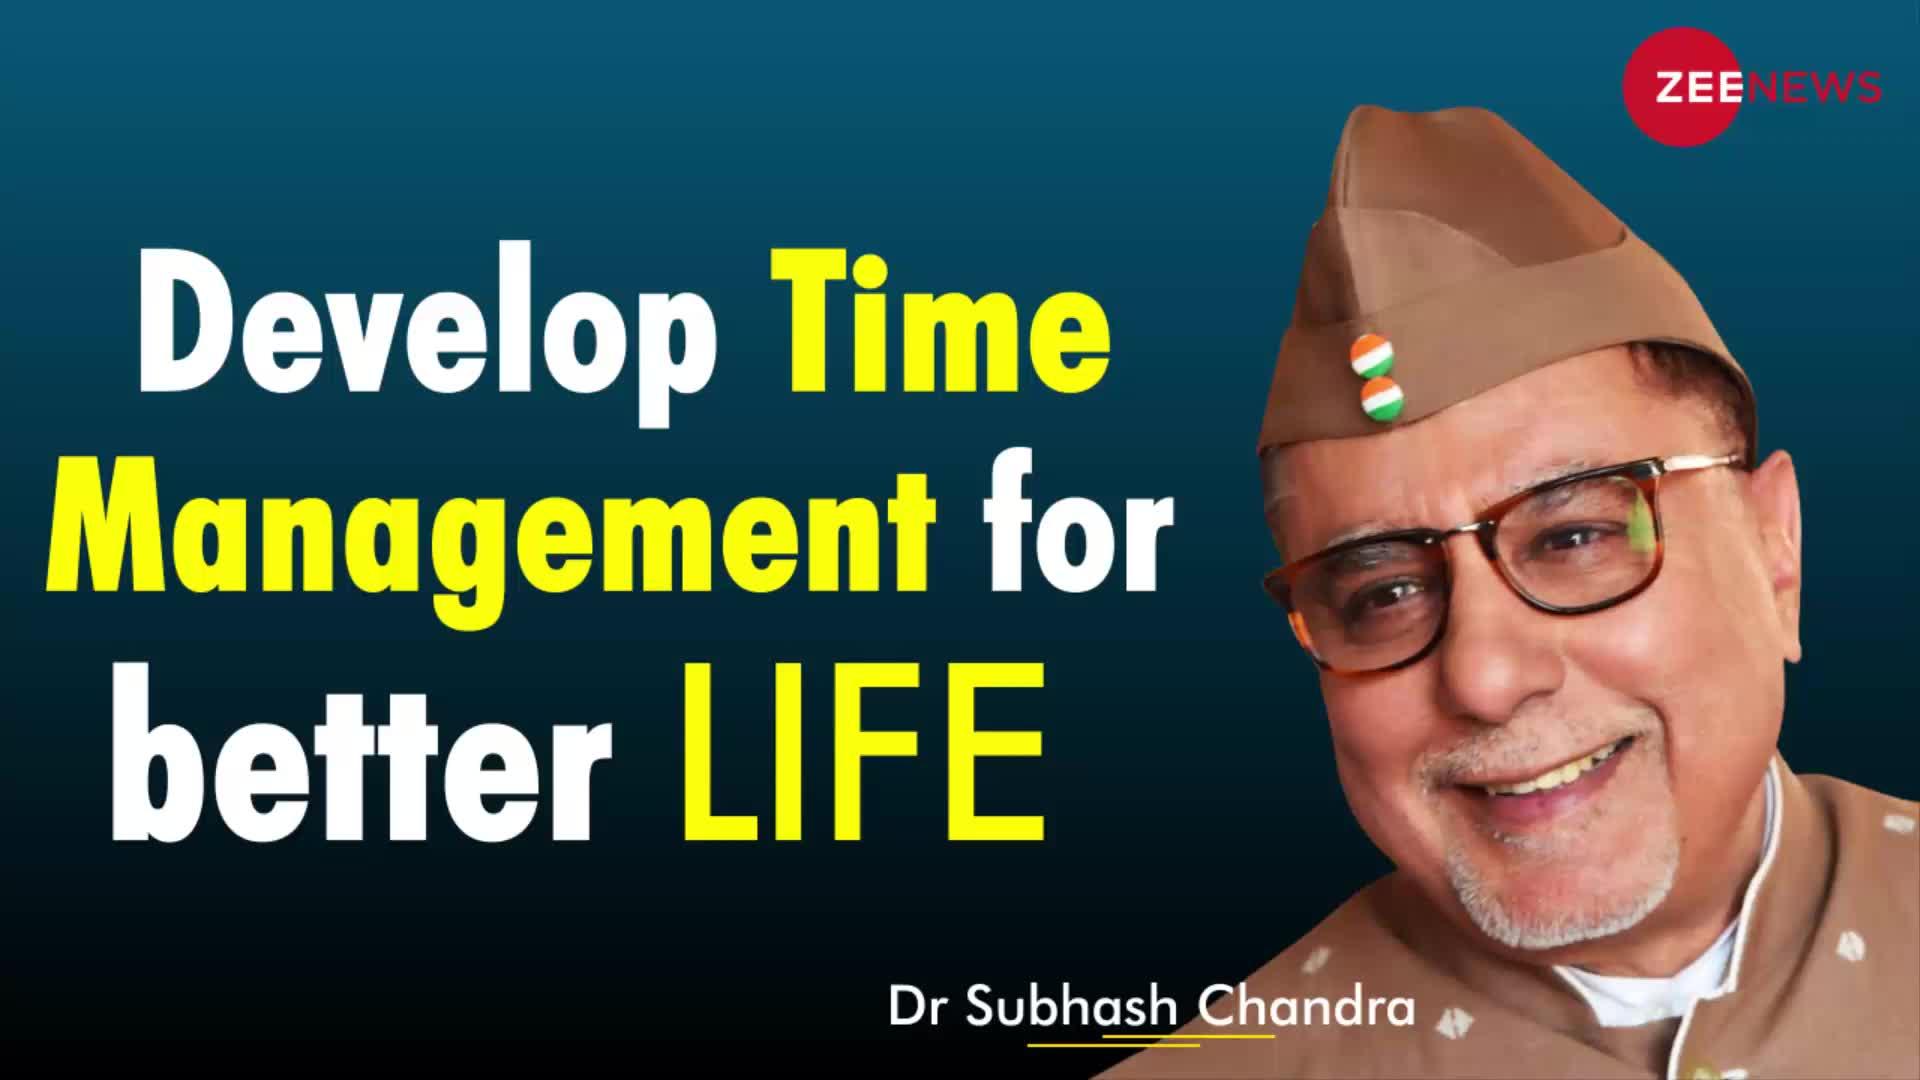 Time management is an art, develop it to achieve success, asserts Dr Subhash Chandra